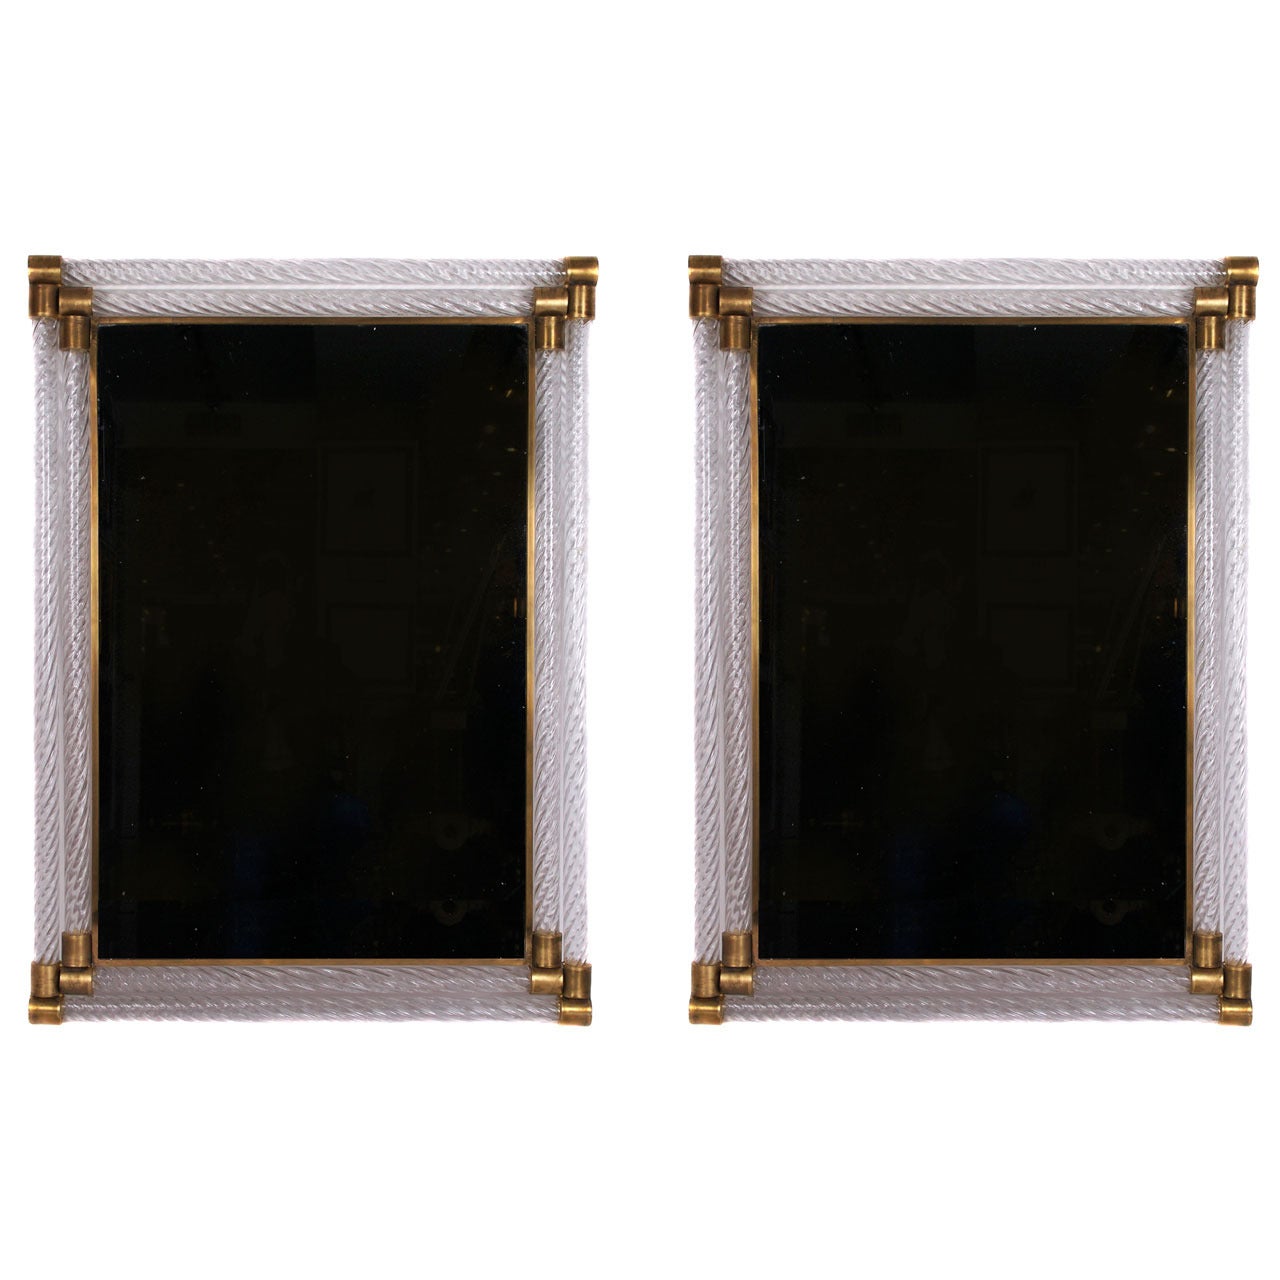 Pair of Barovier and Toso Glass and Bronze Wall Mirrors, circa 1950s For Sale